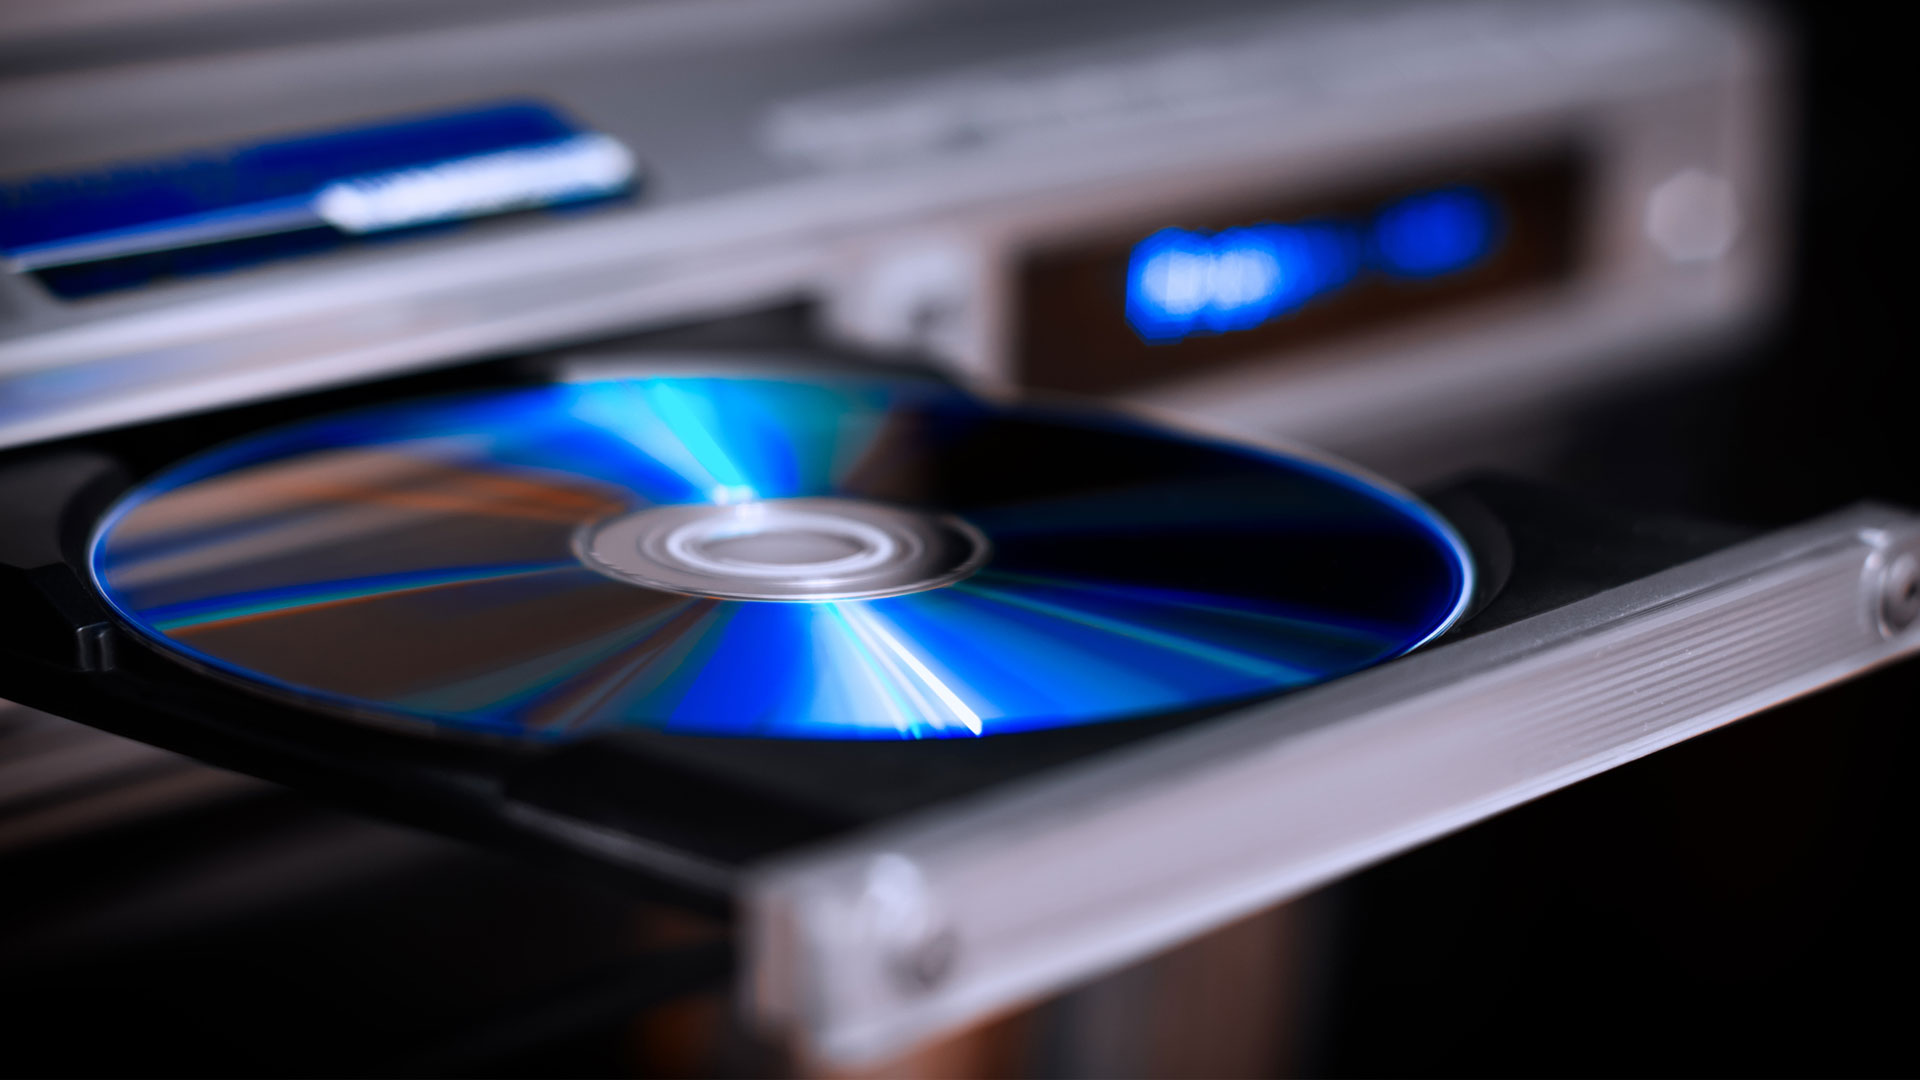 Global Blu-ray Jukeboxes Market: Trends, Growth Drivers, and Future Outlook in Data Storage Solutions